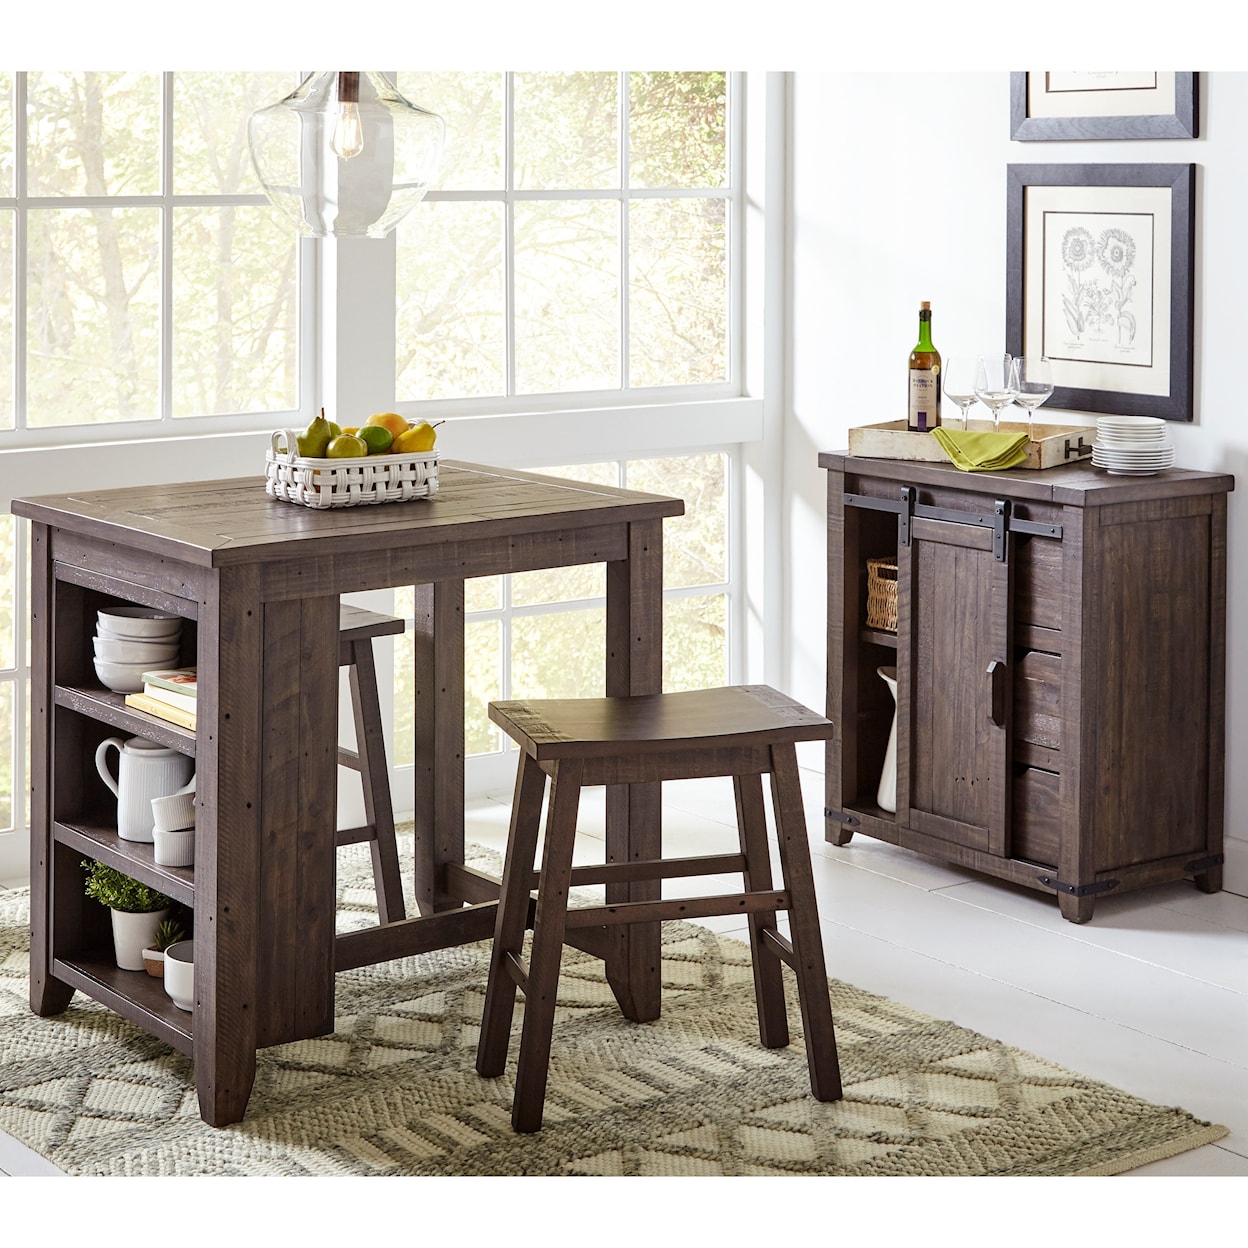 Jofran Madison County 3-Piece Counter Height Dining Set